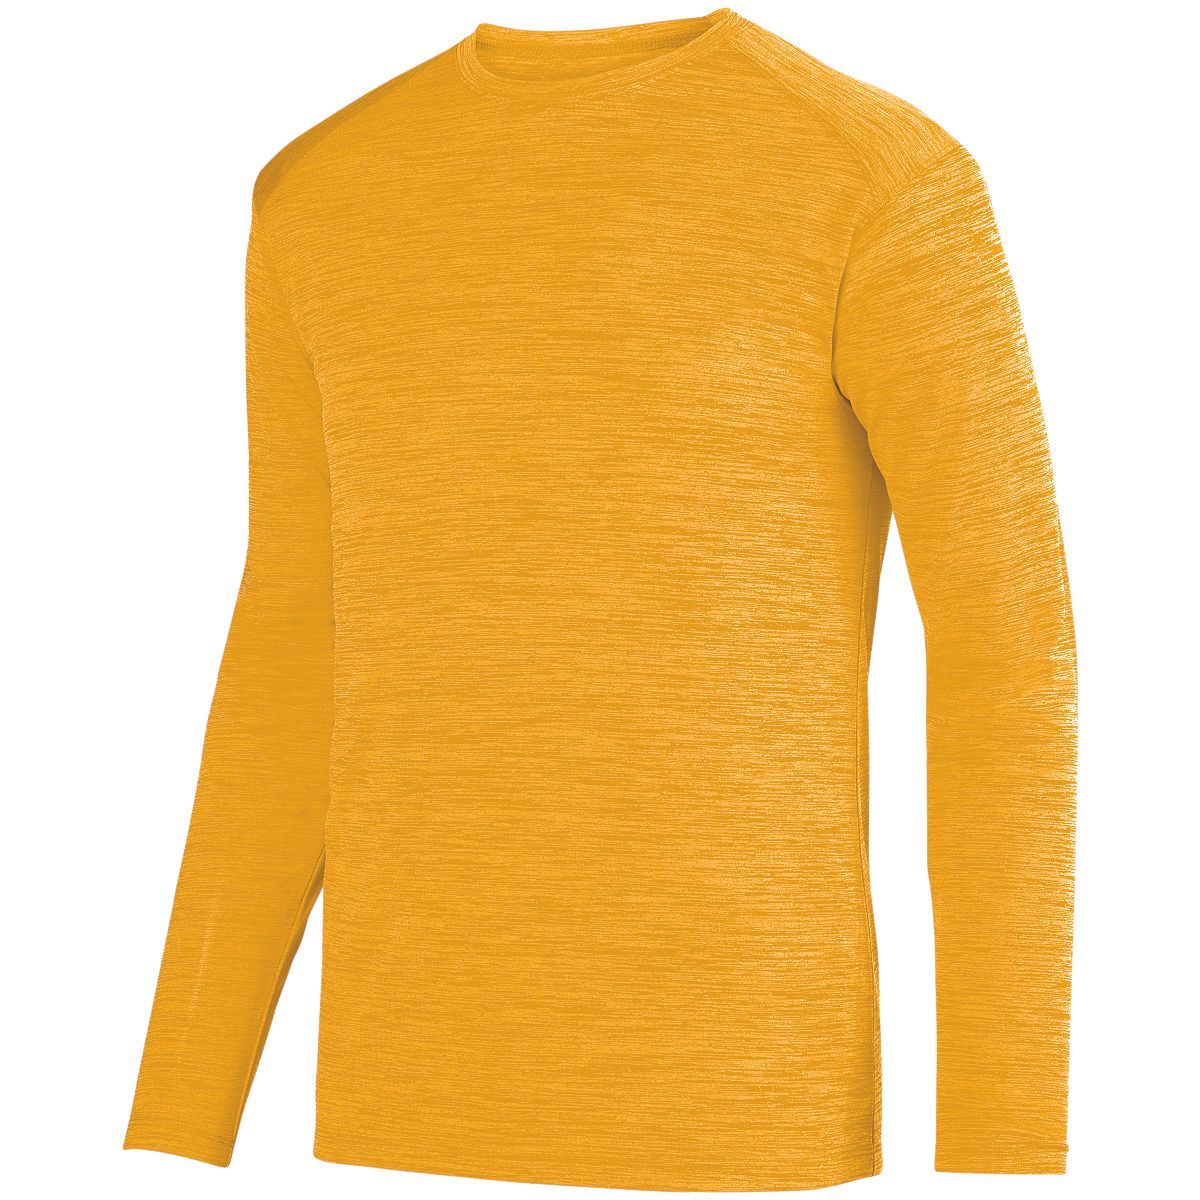 Augusta Sportswear Shadow Tonal Heather Long Sleeve Tee in Gold  -Part of the Adult, Adult-Tee-Shirt, T-Shirts, Augusta-Products, Shirts, Tonal-Fleece-Collection product lines at KanaleyCreations.com